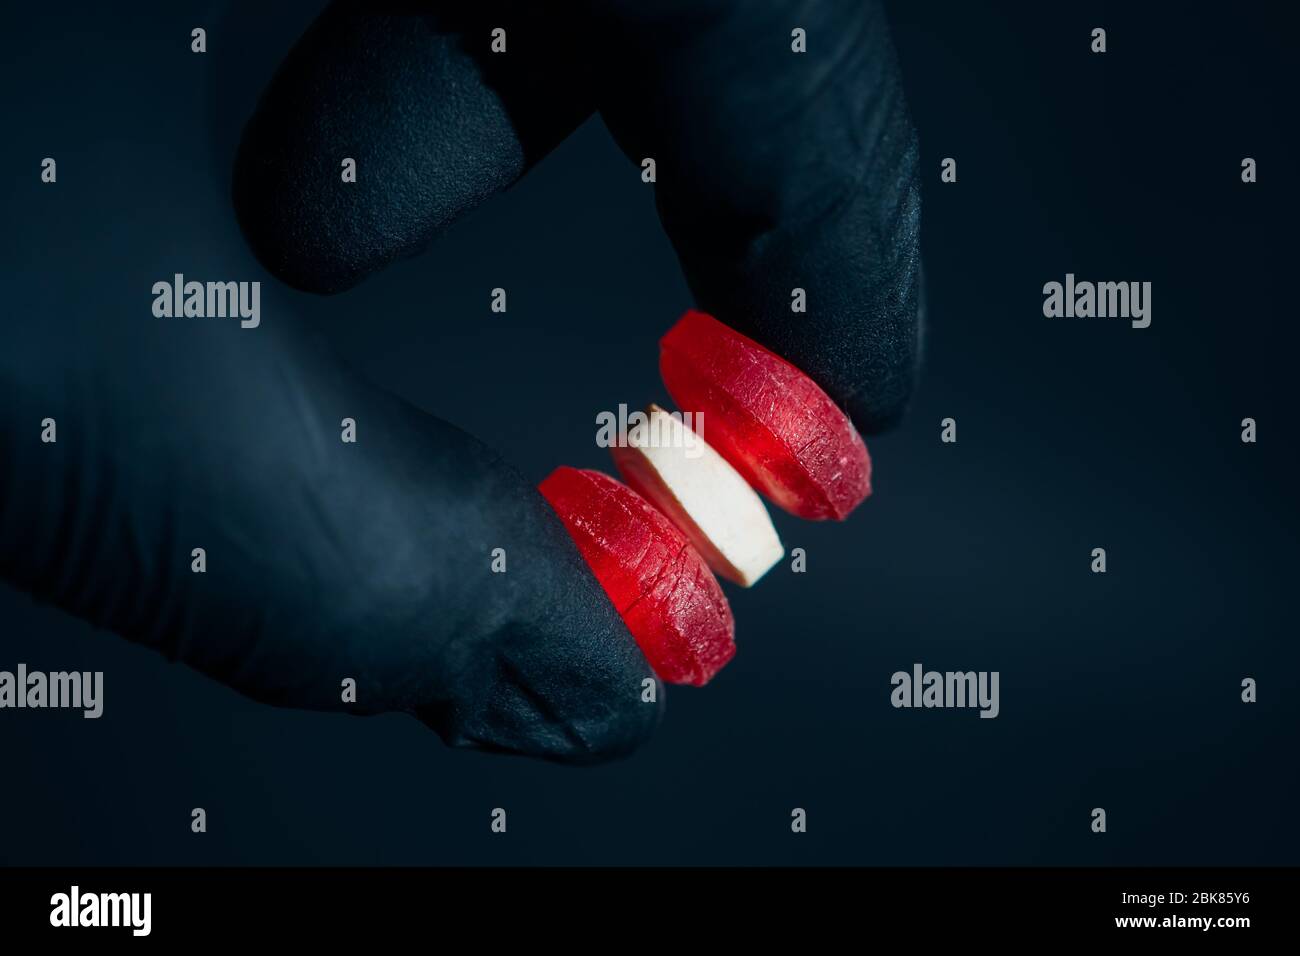 Holding yellow pills in hand with gloves close up on dark background Stock Photo